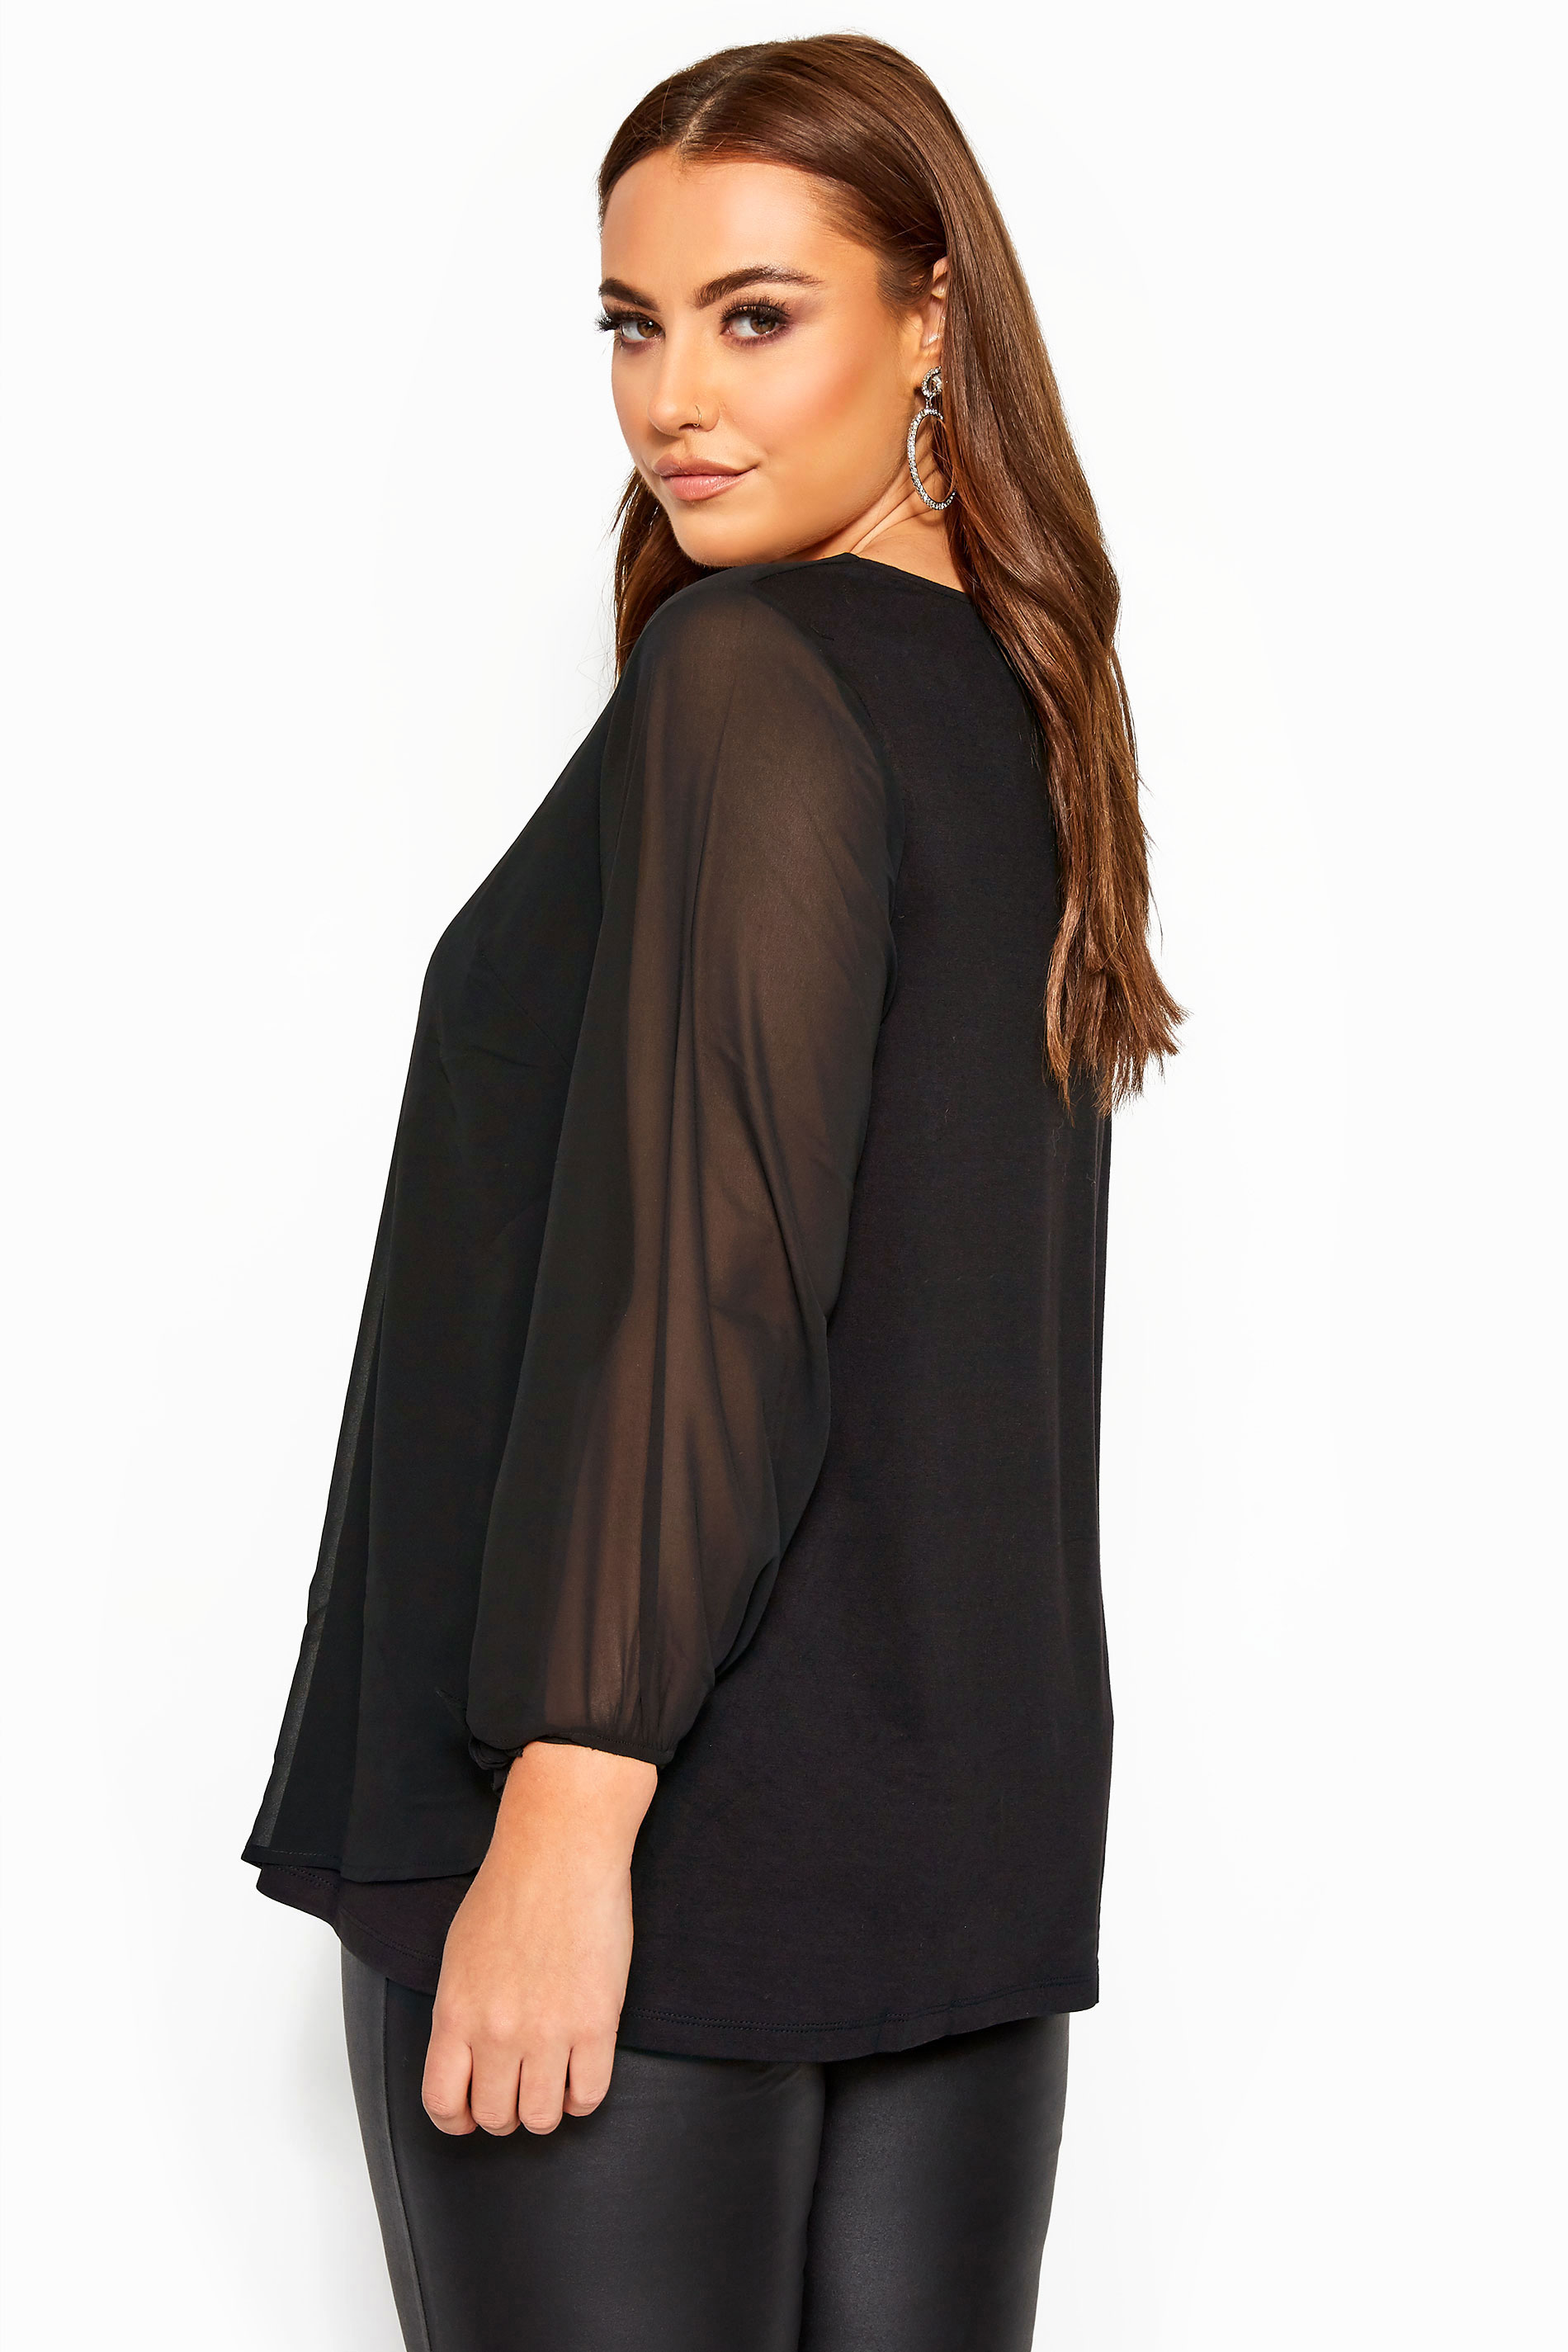 YOURS LONDON Plus Size Black Tie Sleeve Chiffon Blouse | Yours Clothing 3